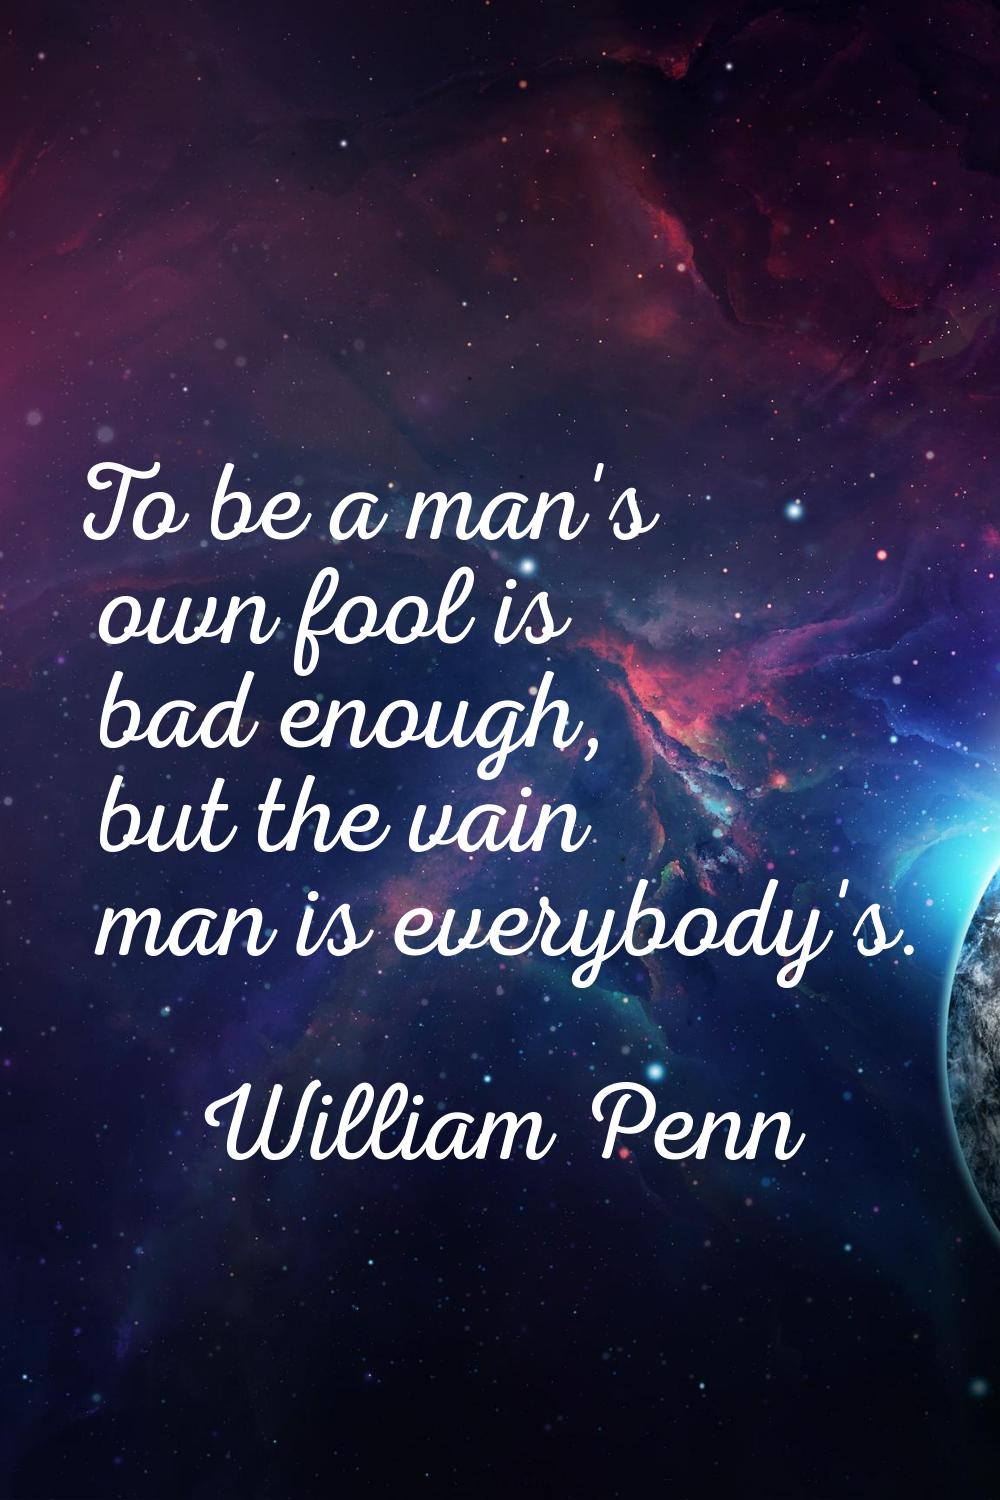 To be a man's own fool is bad enough, but the vain man is everybody's.